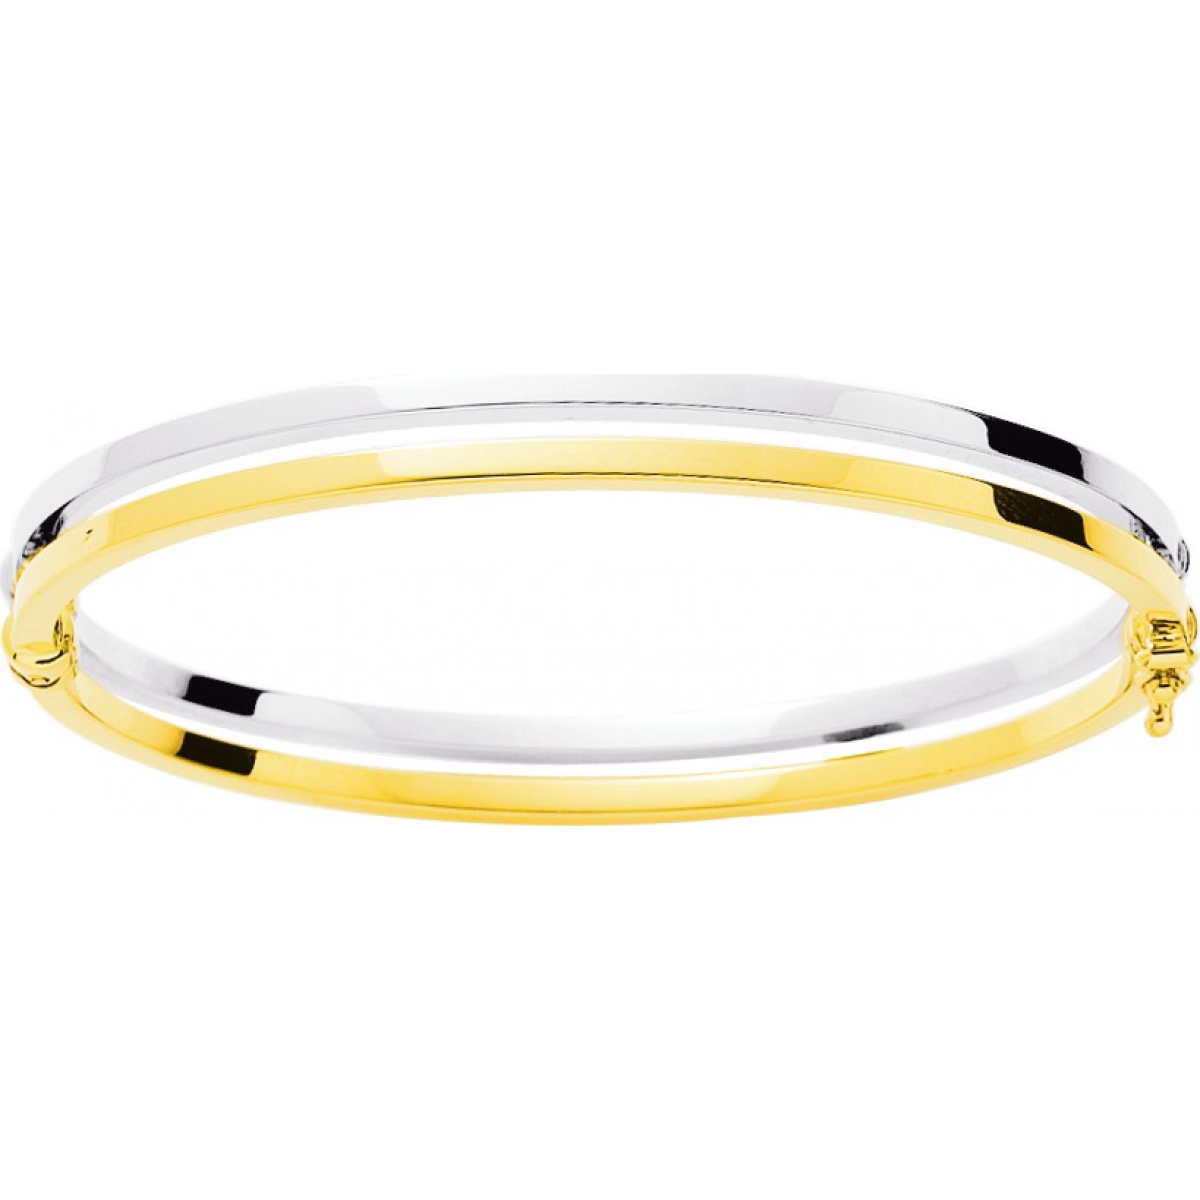 Bangle twisted square wire 18K 2TG Lua Blanca  332.1G.0